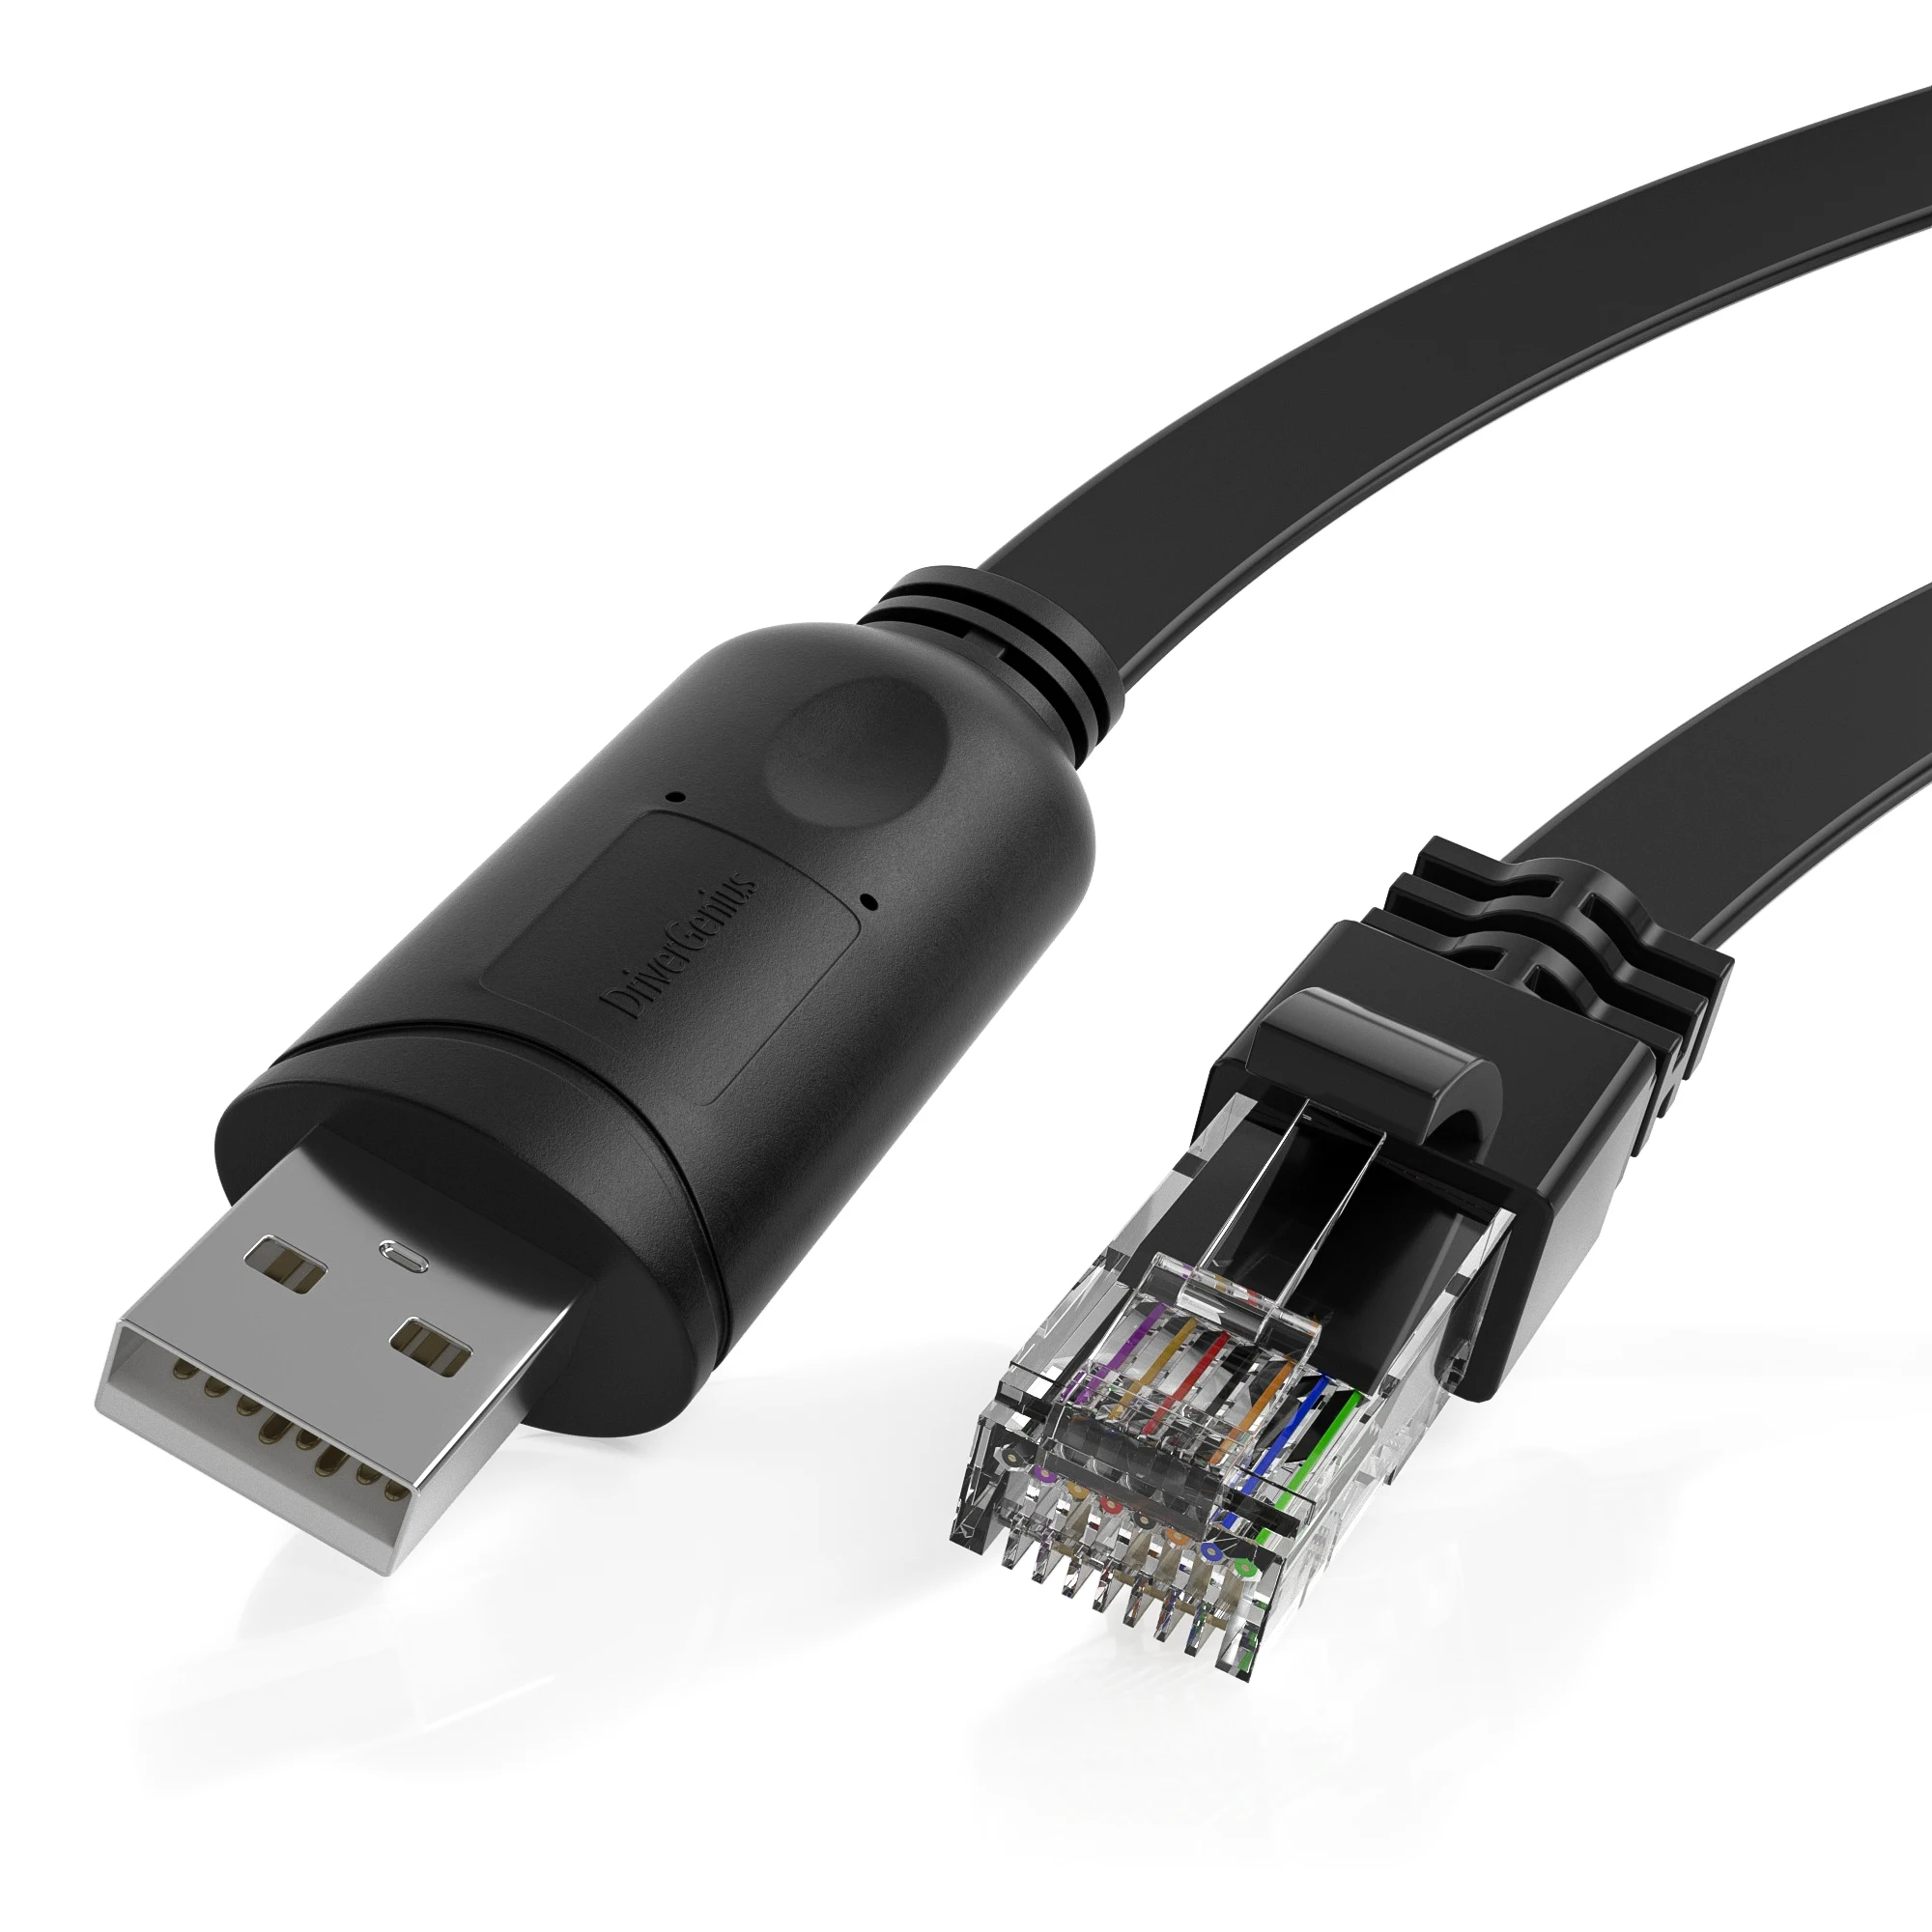 Wholesale DriverGenius USB to RJ45 Console Cable - USB RS232 / DB9 Port to RJ45 Adapter for Router Network Switch m.alibaba.com